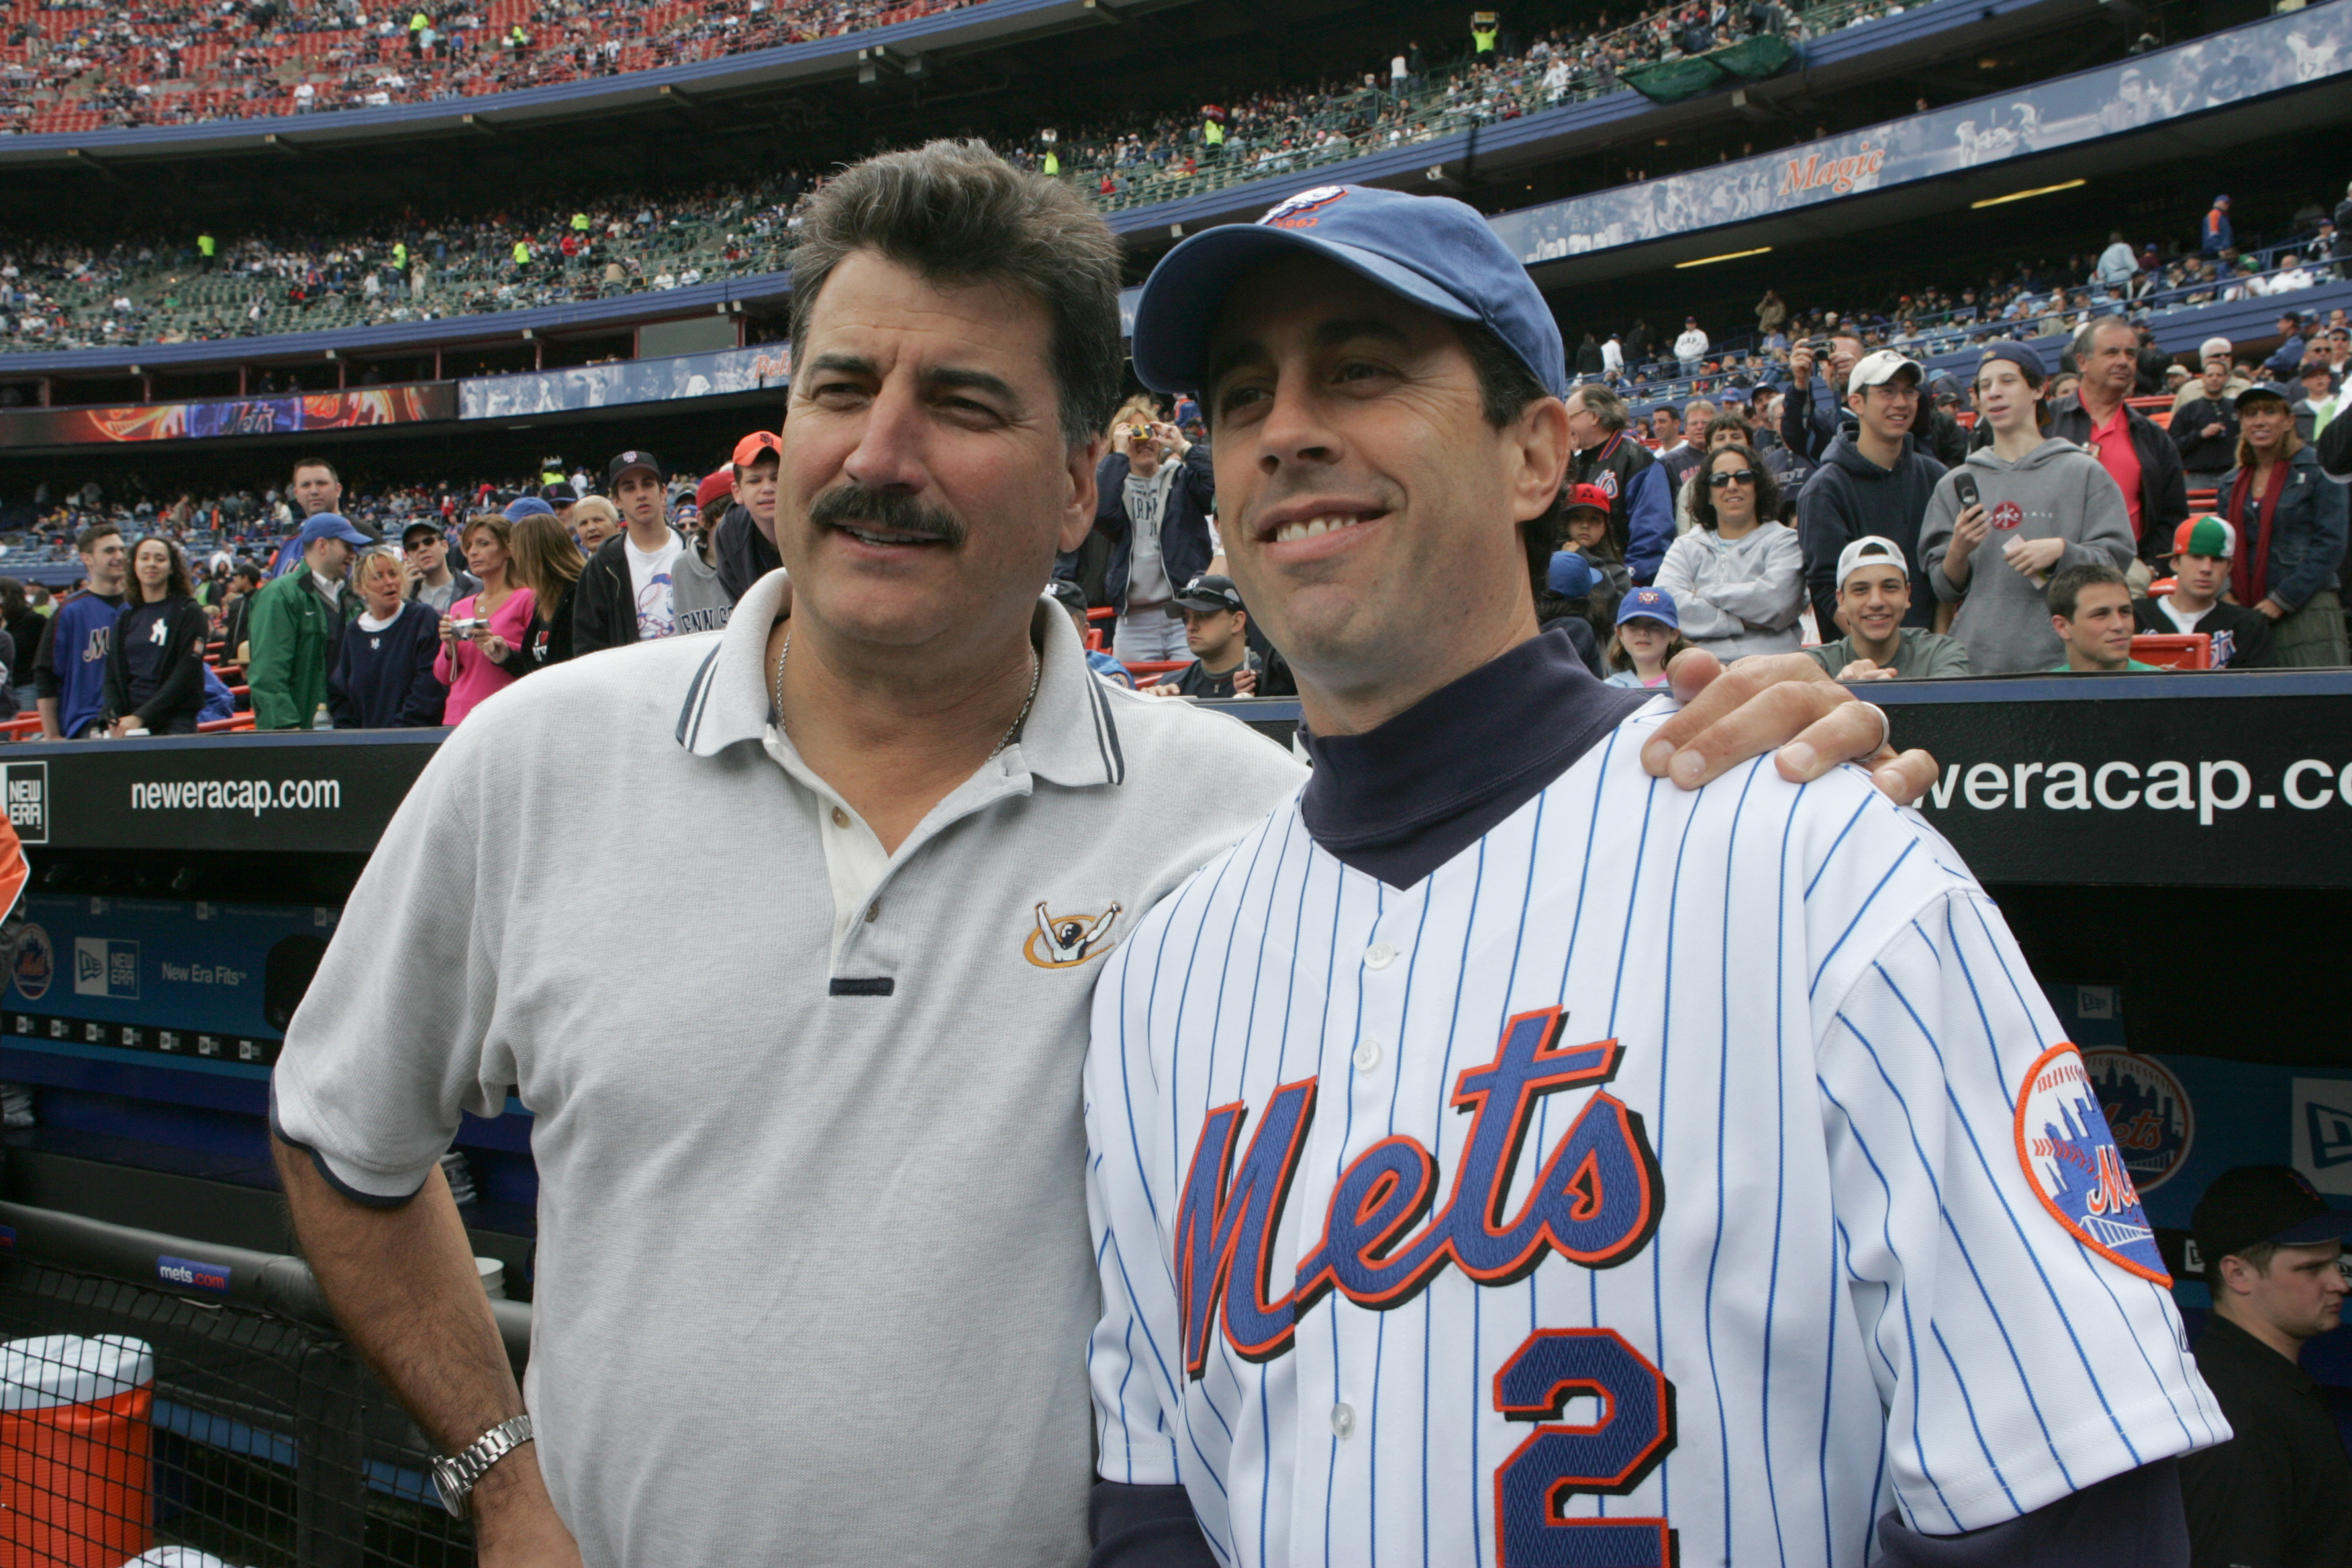 FLUSHING, NY - MAY 22:  Former player Keith Hernandez (L) poses for a picture with comedian Jerry Seinfeld before the game between the New York Mets and the New York Yankees at Shea Stadium on May 22, 2005 in Flushing, New York. The Yankees defeated the M